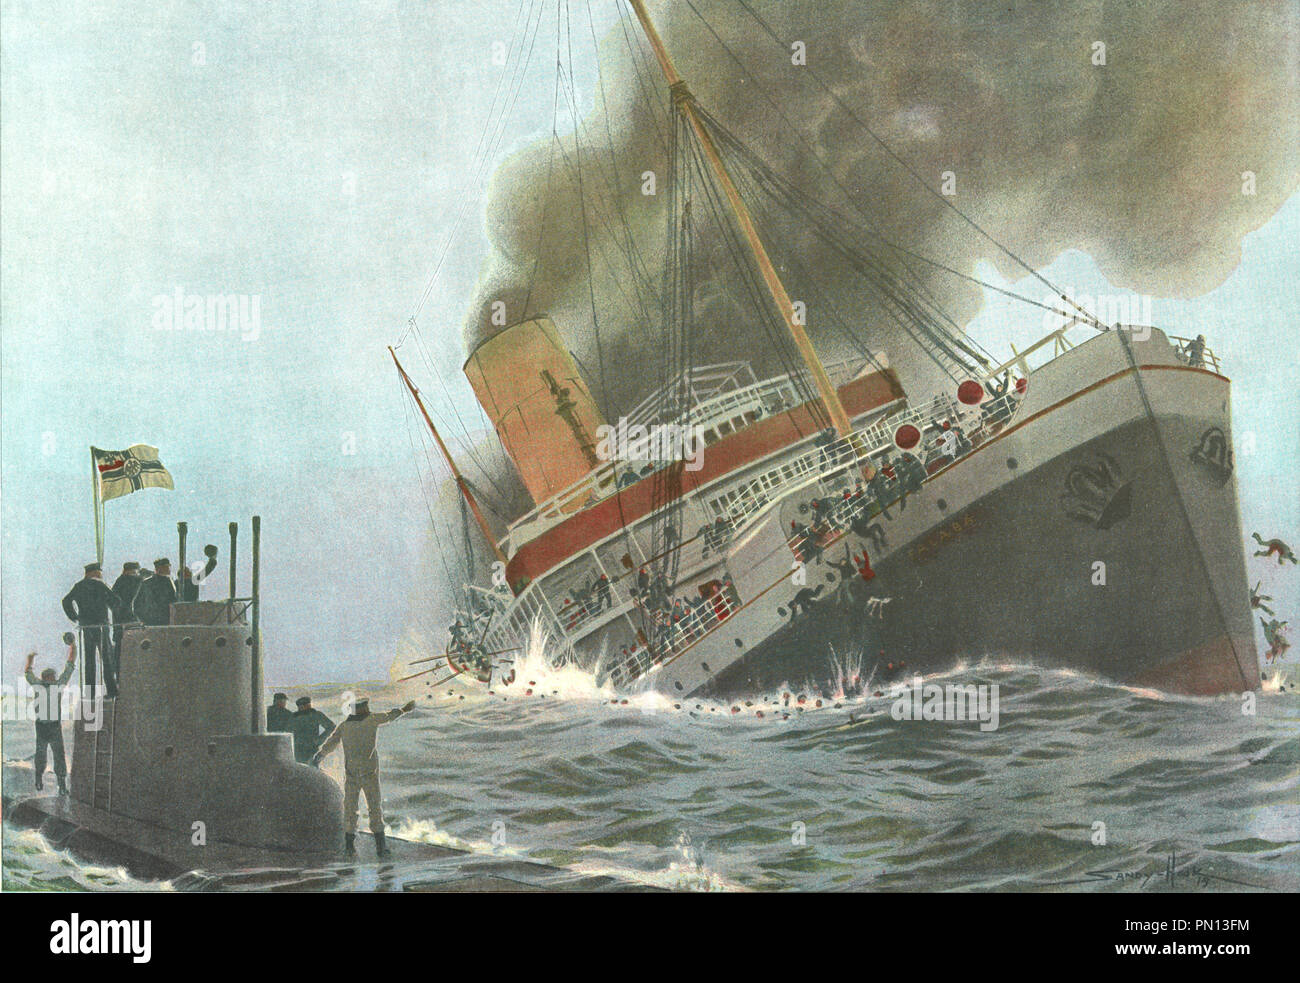 RMS Falaba sinking on March 28, 1915, British steamship RMS Falaba was torpedoed and sunk by German U-boat U-28 Stock Photo